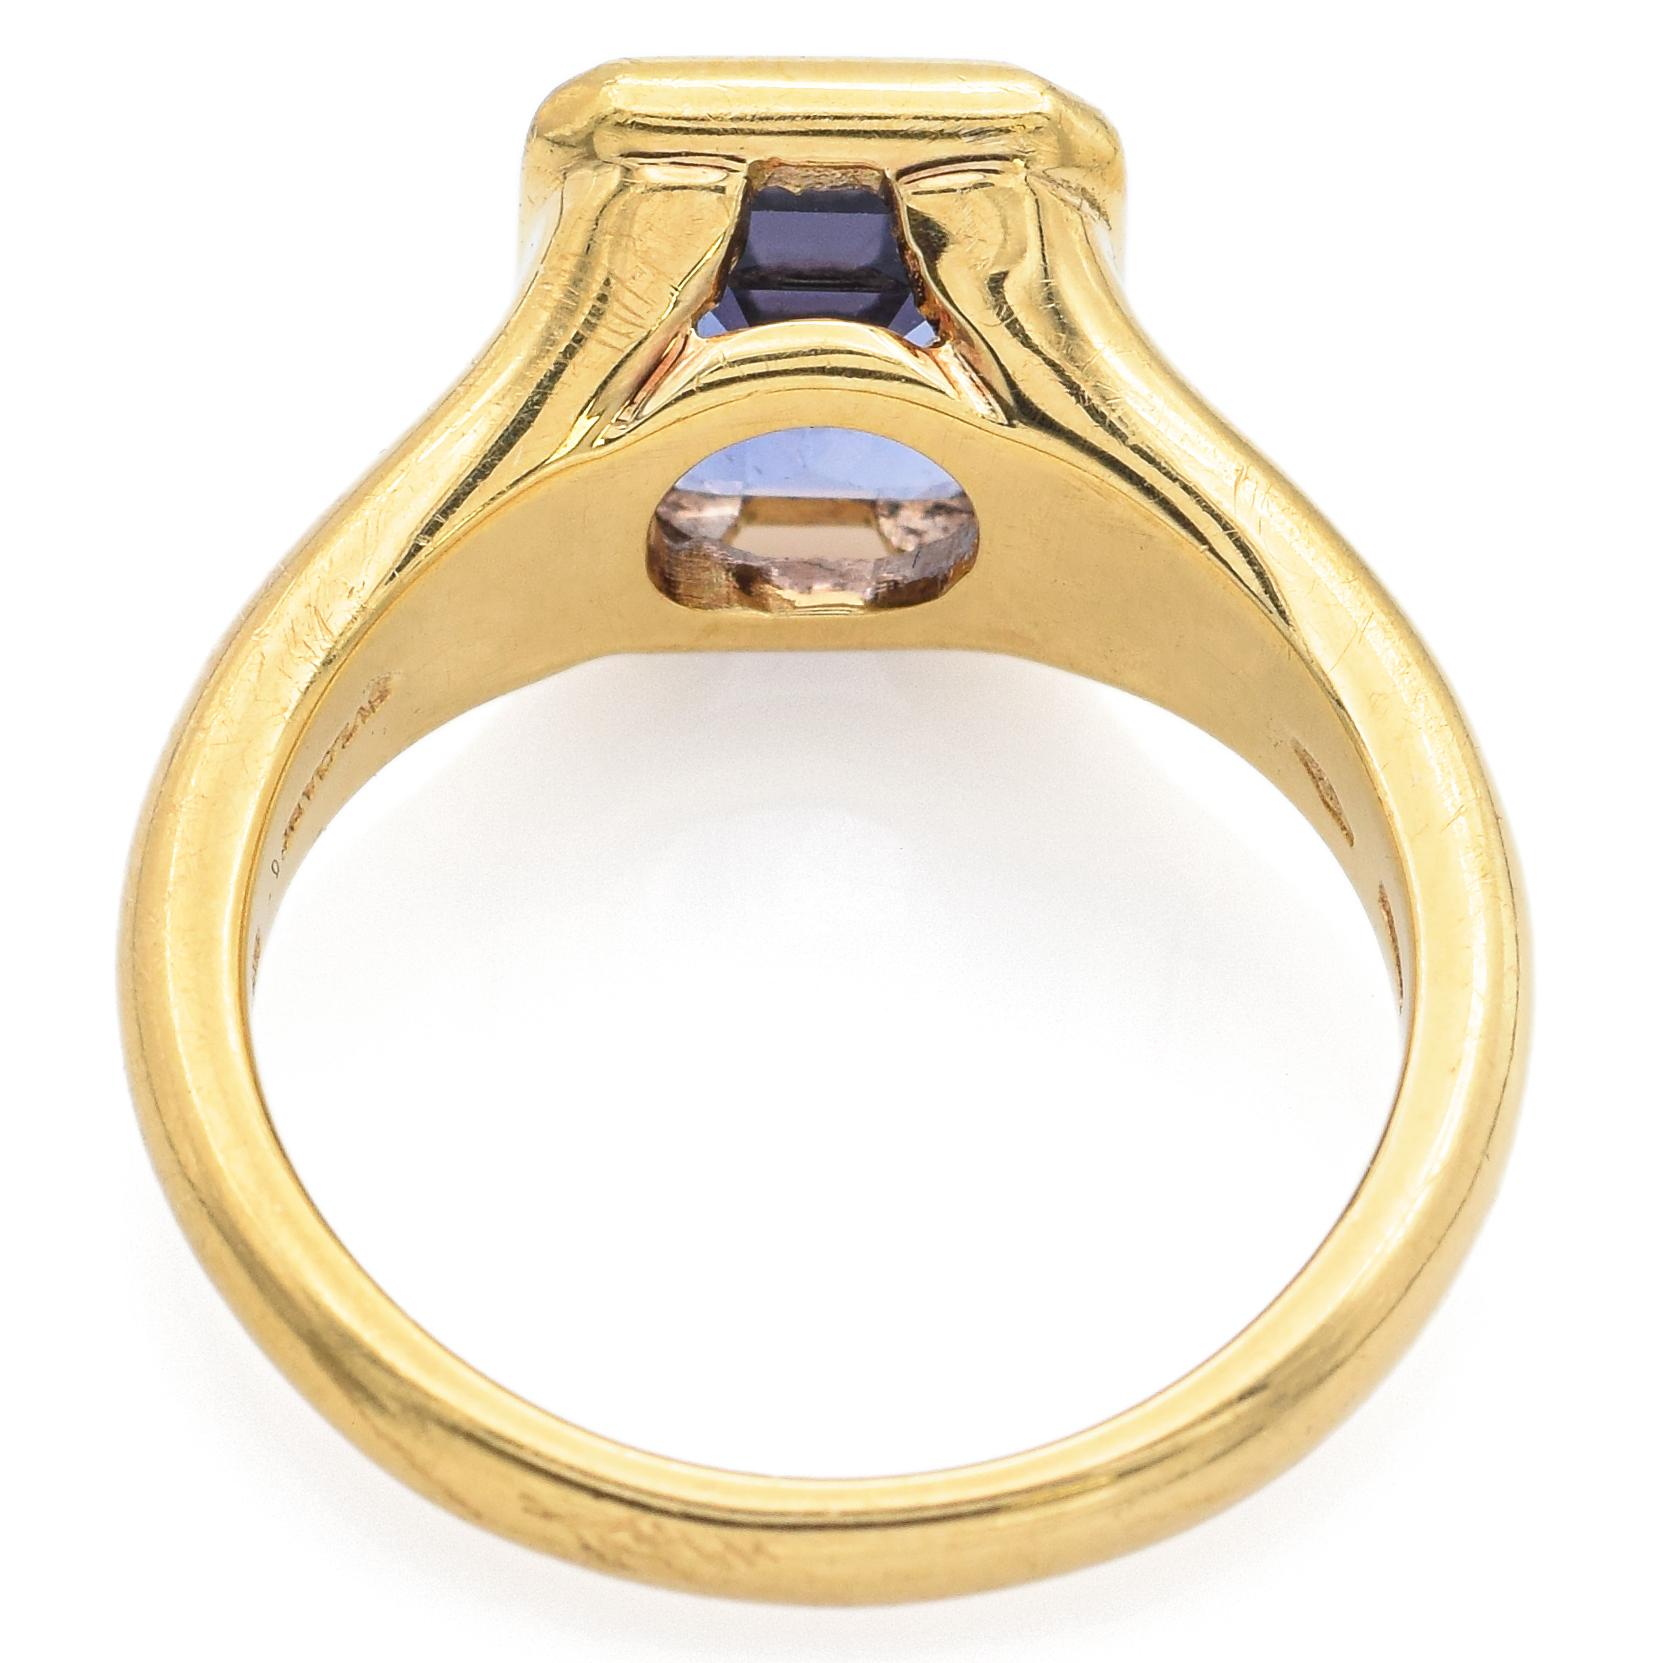 Emerald Cut Vintage Bvlgari Tanzanite Yellow Gold Band Ring with Pouch Size 5.25